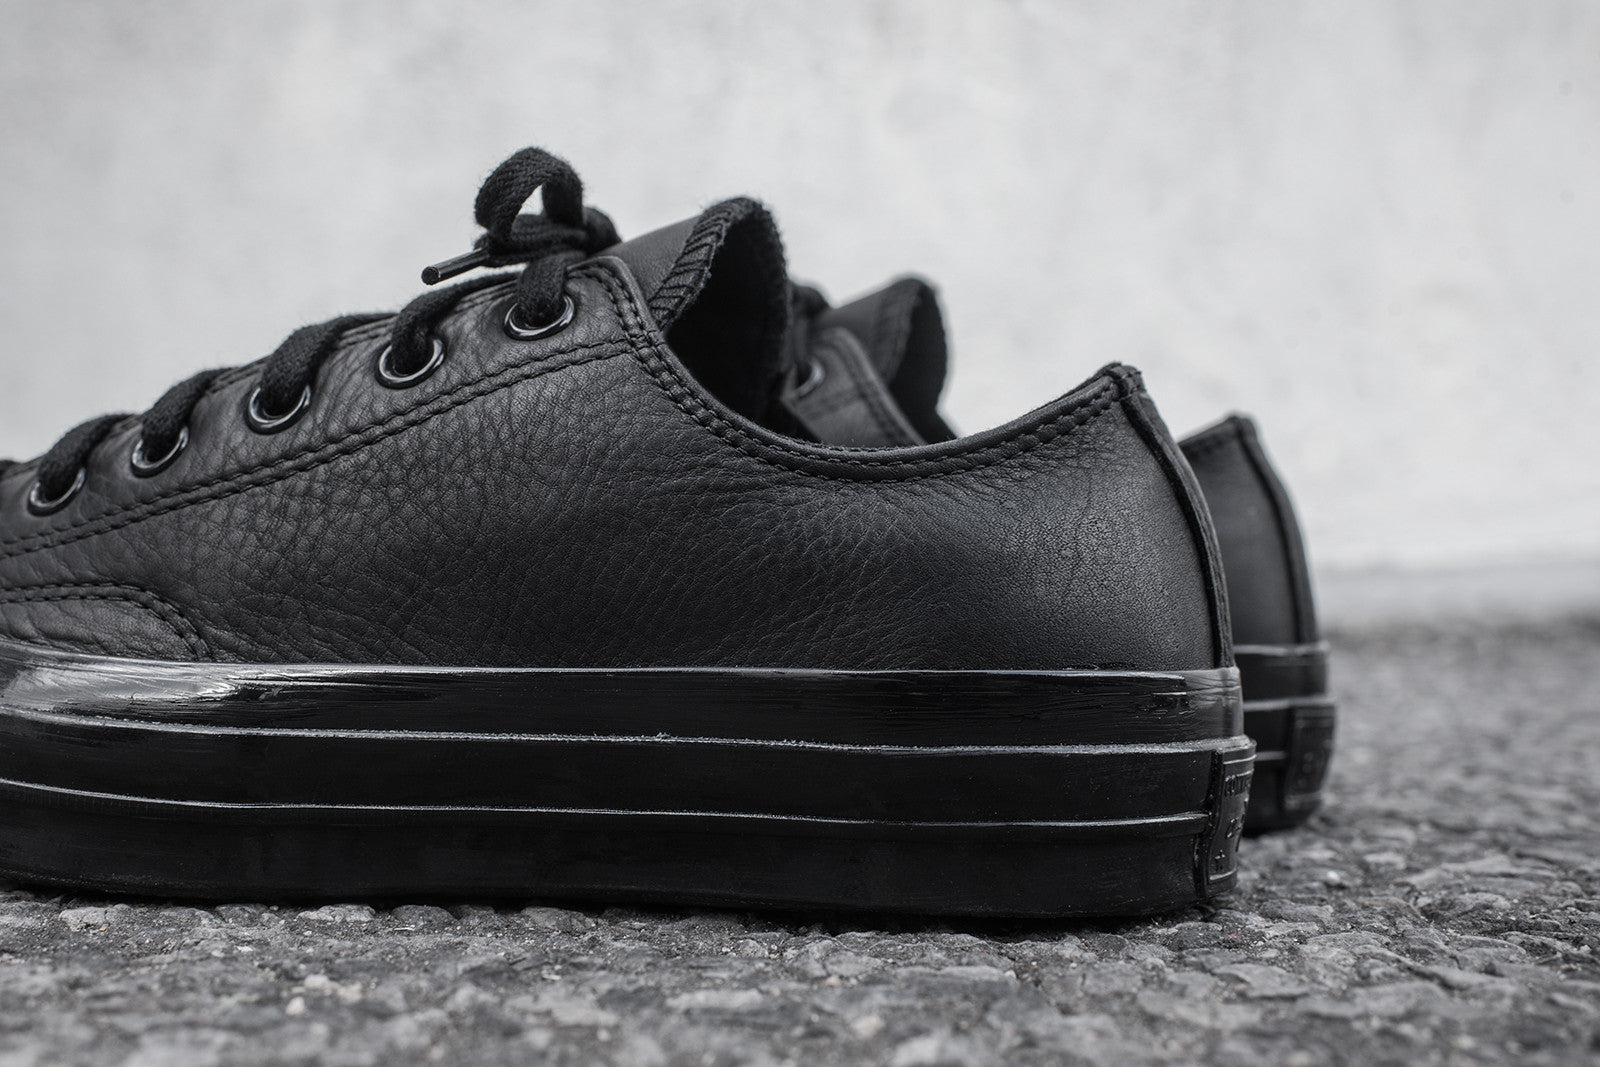 converse chuck taylor 70 ox leather